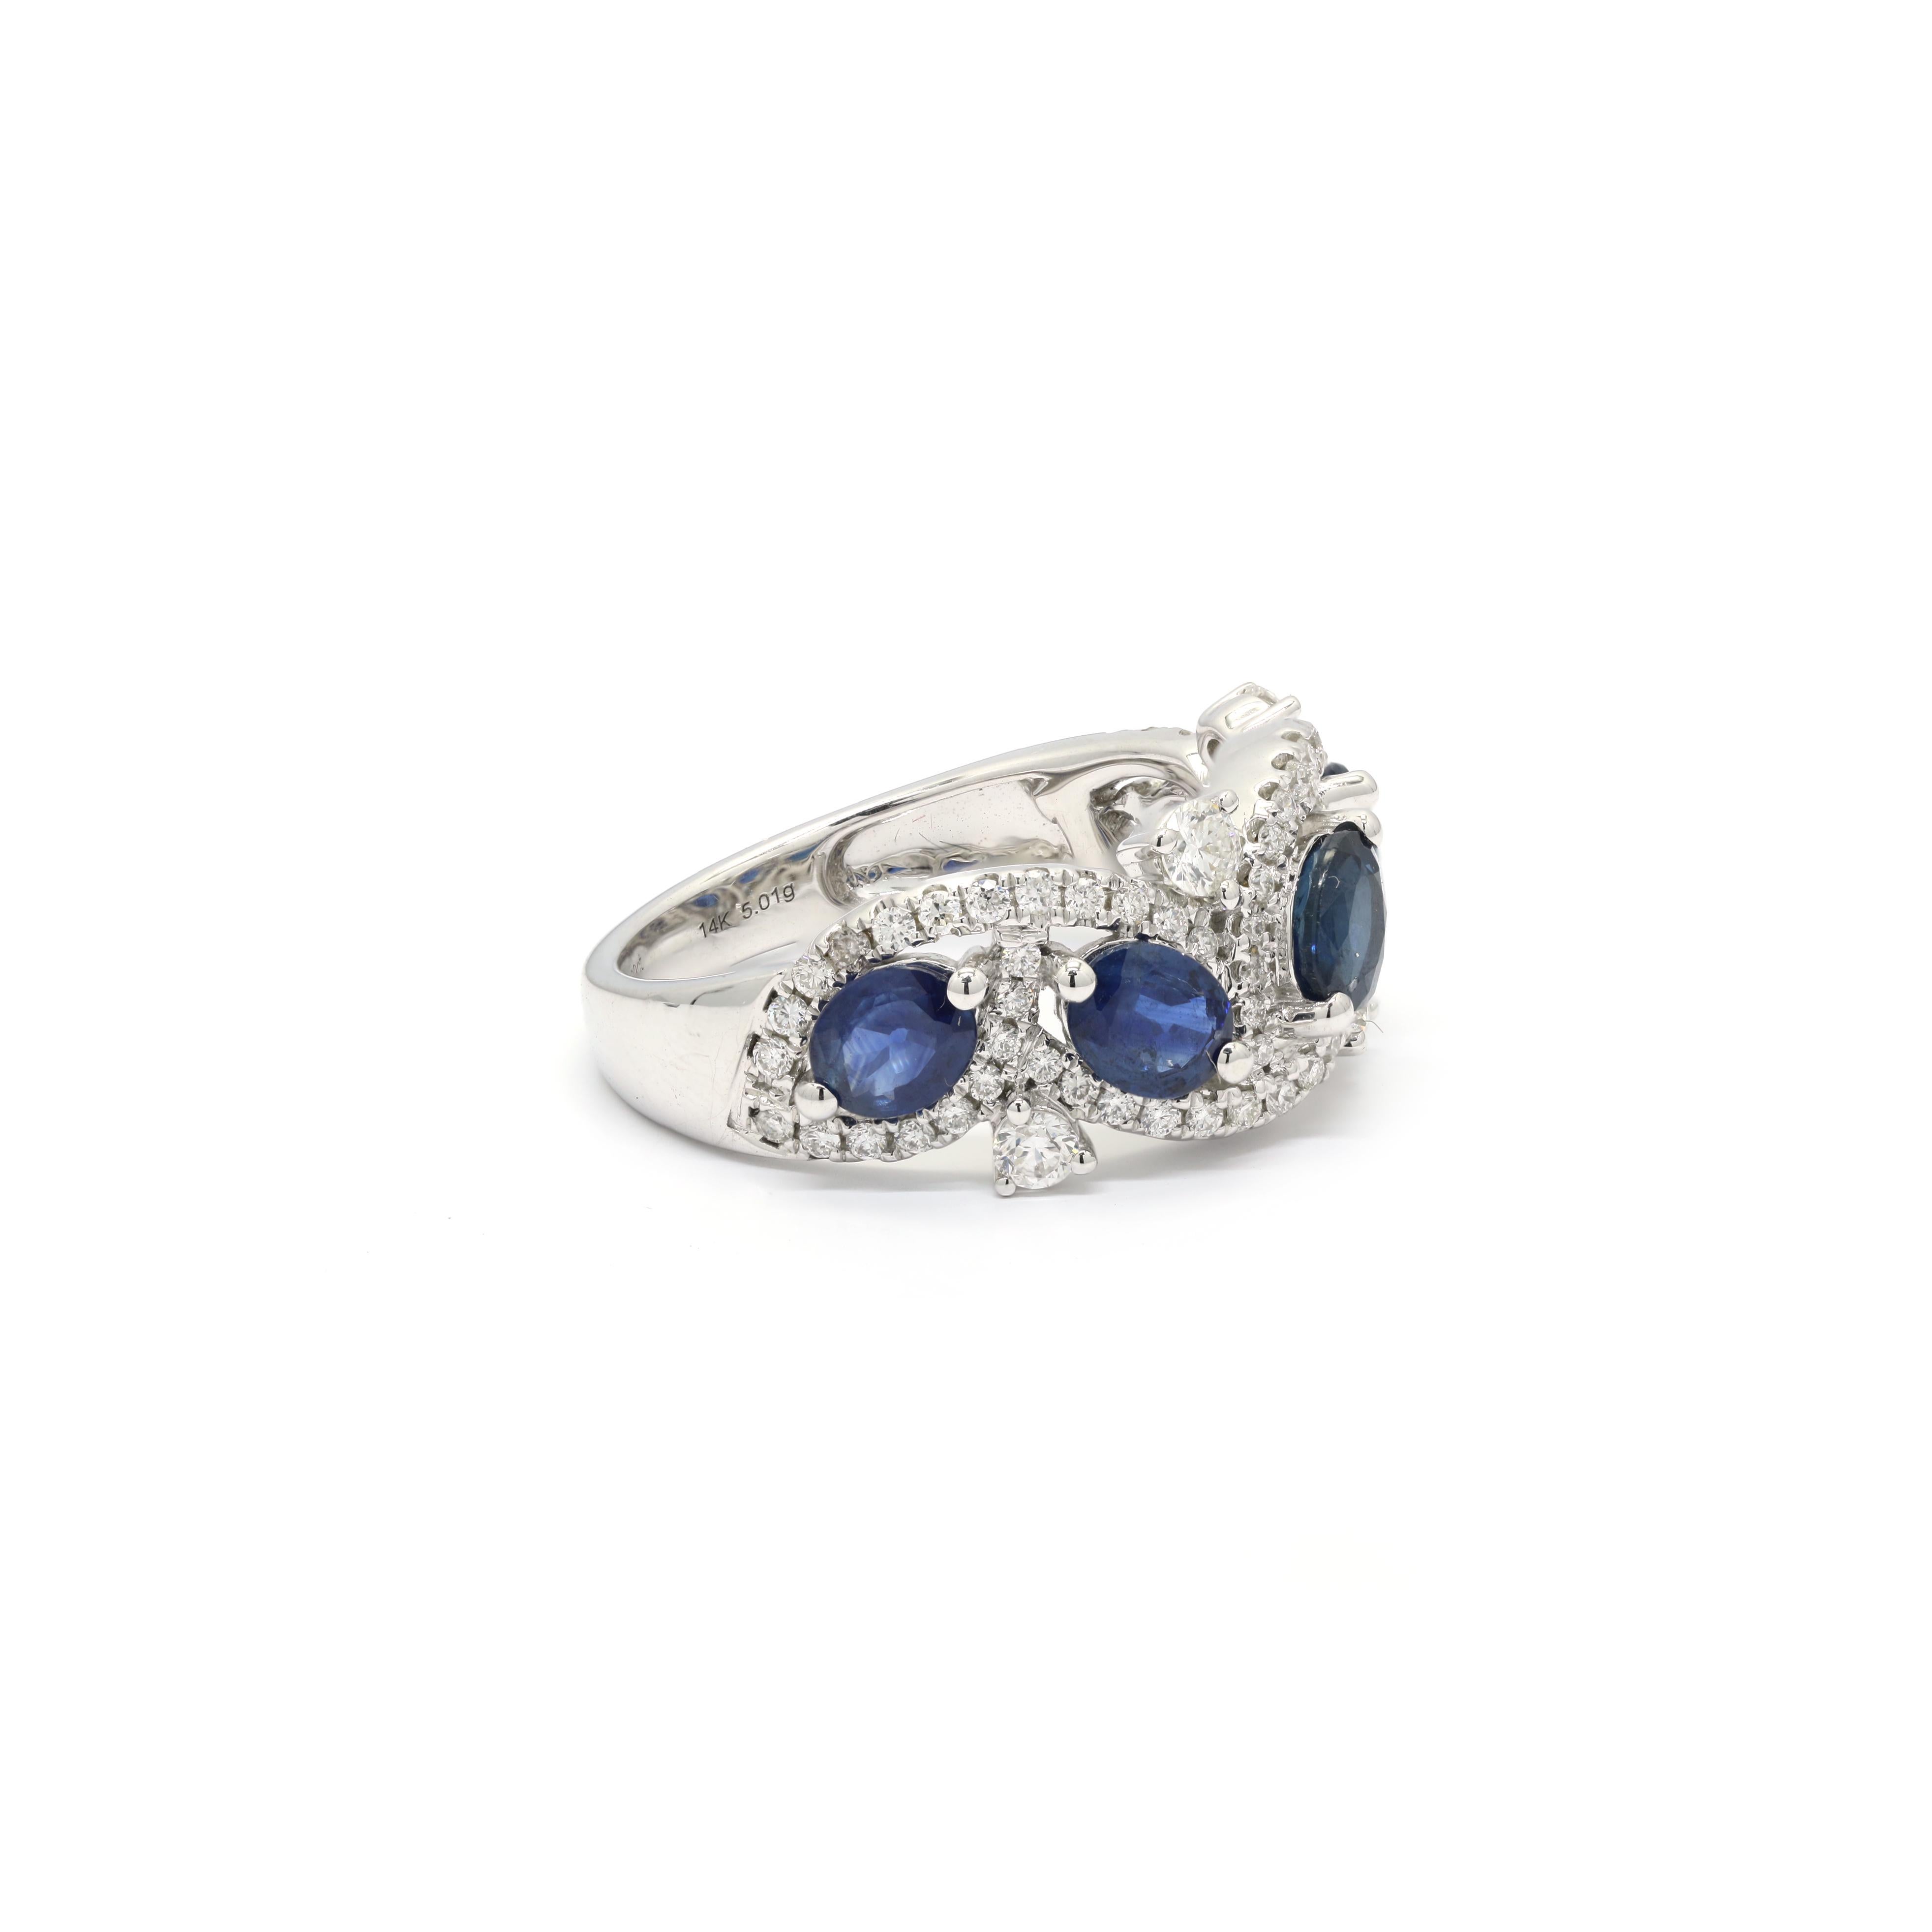 For Sale:  Oval Cut Blue Sapphire Diamond Ring in 14K White Gold  3